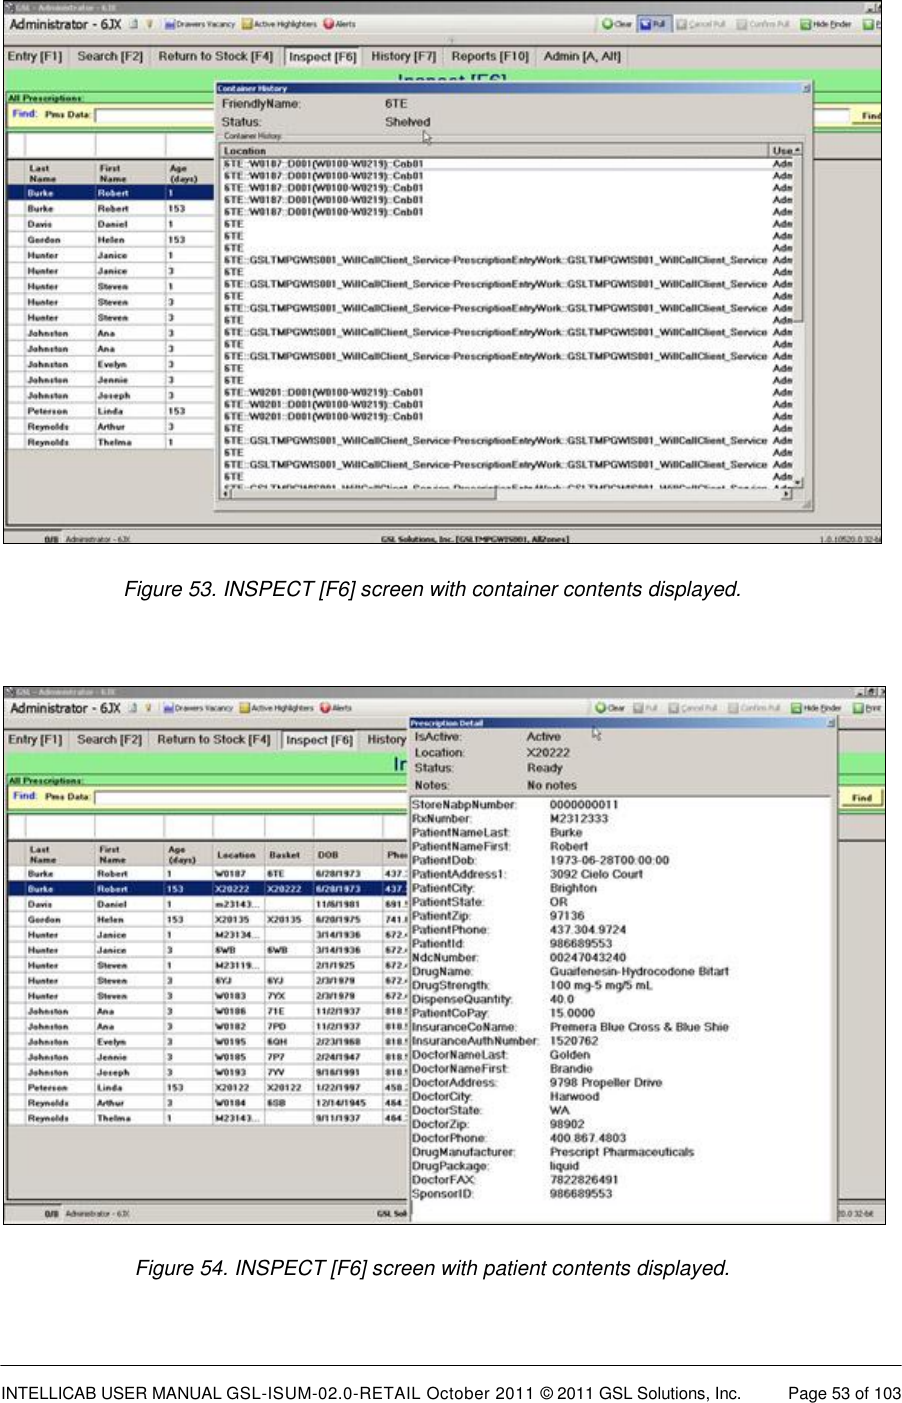  INTELLICAB USER MANUAL GSL-ISUM-02.0-RETAIL October 2011 © 2011 GSL Solutions, Inc.   Page 53 of 103    Figure 53. INSPECT [F6] screen with container contents displayed.   Figure 54. INSPECT [F6] screen with patient contents displayed. 